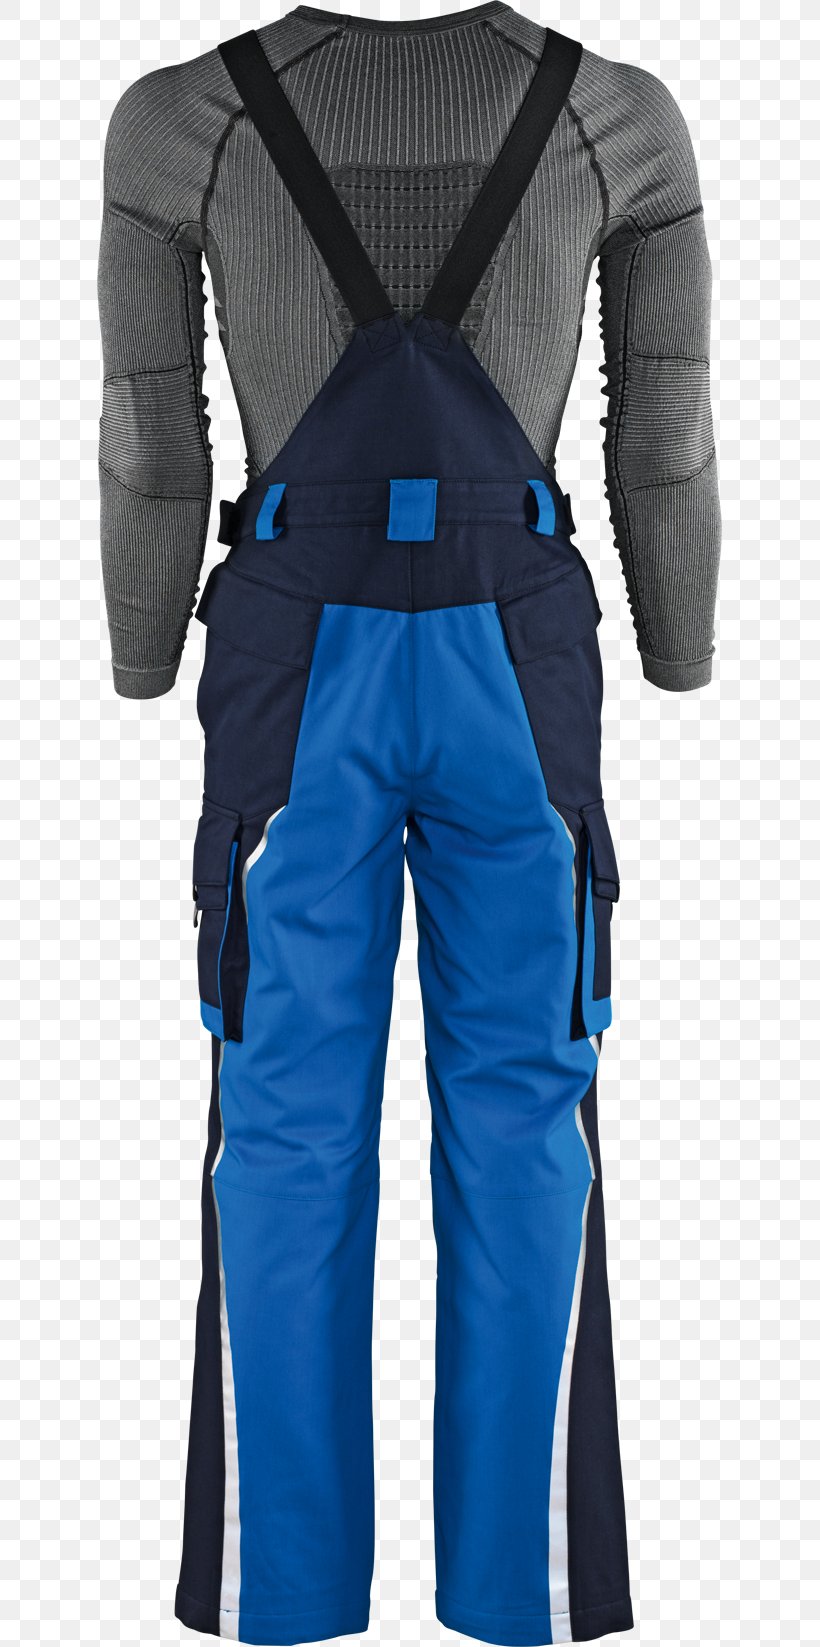 Dry Suit Hockey Protective Pants & Ski Shorts Overall, PNG, 625x1647px, Dry Suit, Electric Blue, Hockey, Hockey Protective Pants Ski Shorts, Overall Download Free